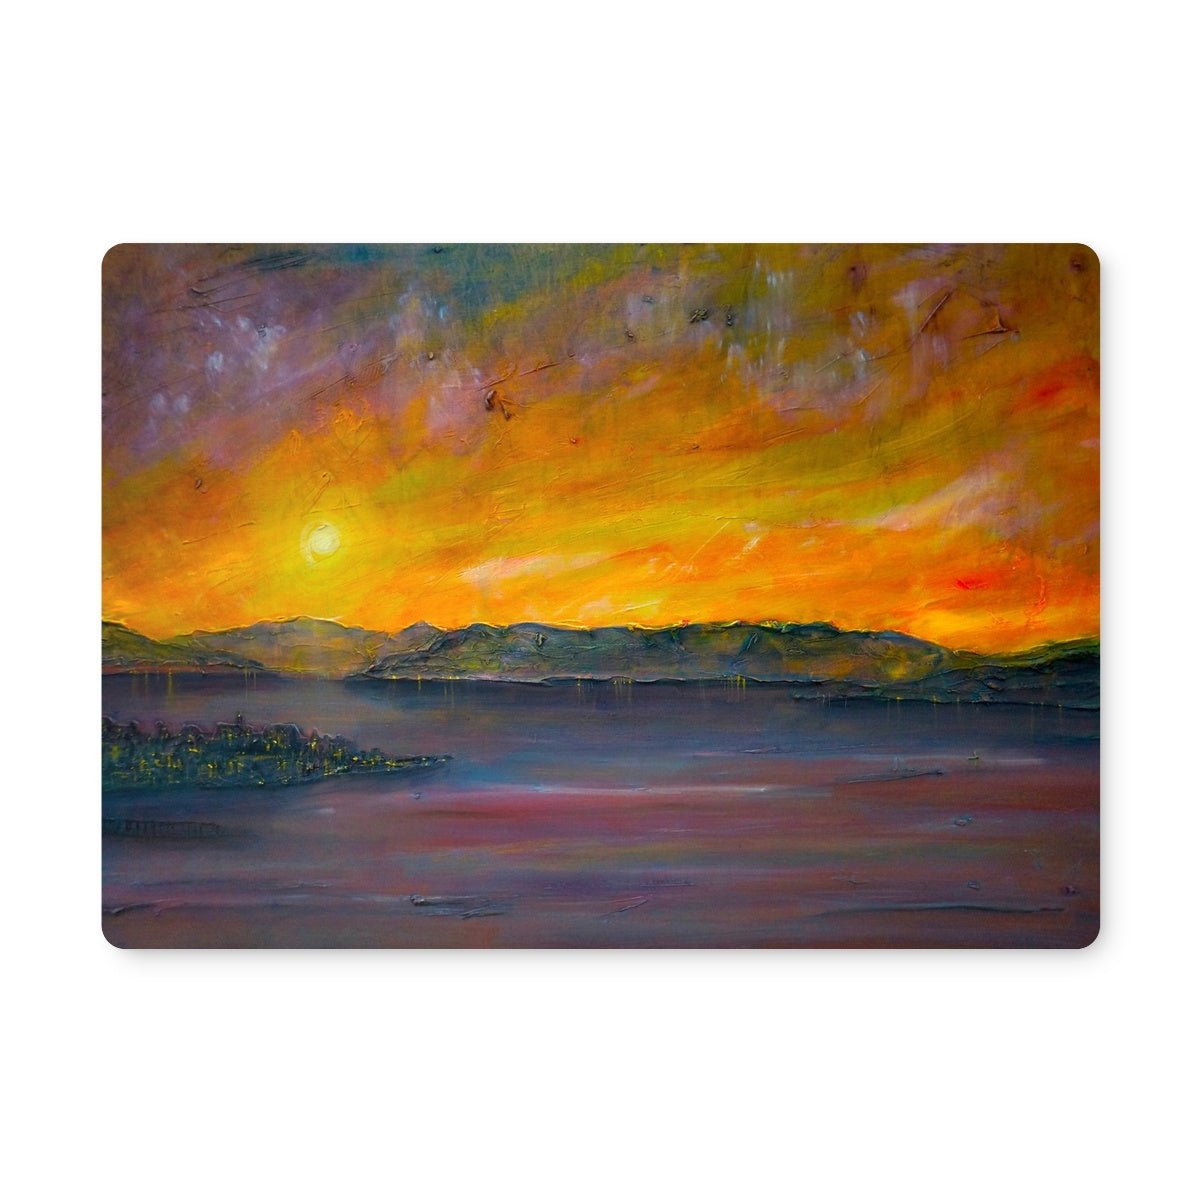 Sunset Over Gourock Art Gifts Placemat-Placemats-River Clyde Art Gallery-Single Placemat-Paintings, Prints, Homeware, Art Gifts From Scotland By Scottish Artist Kevin Hunter